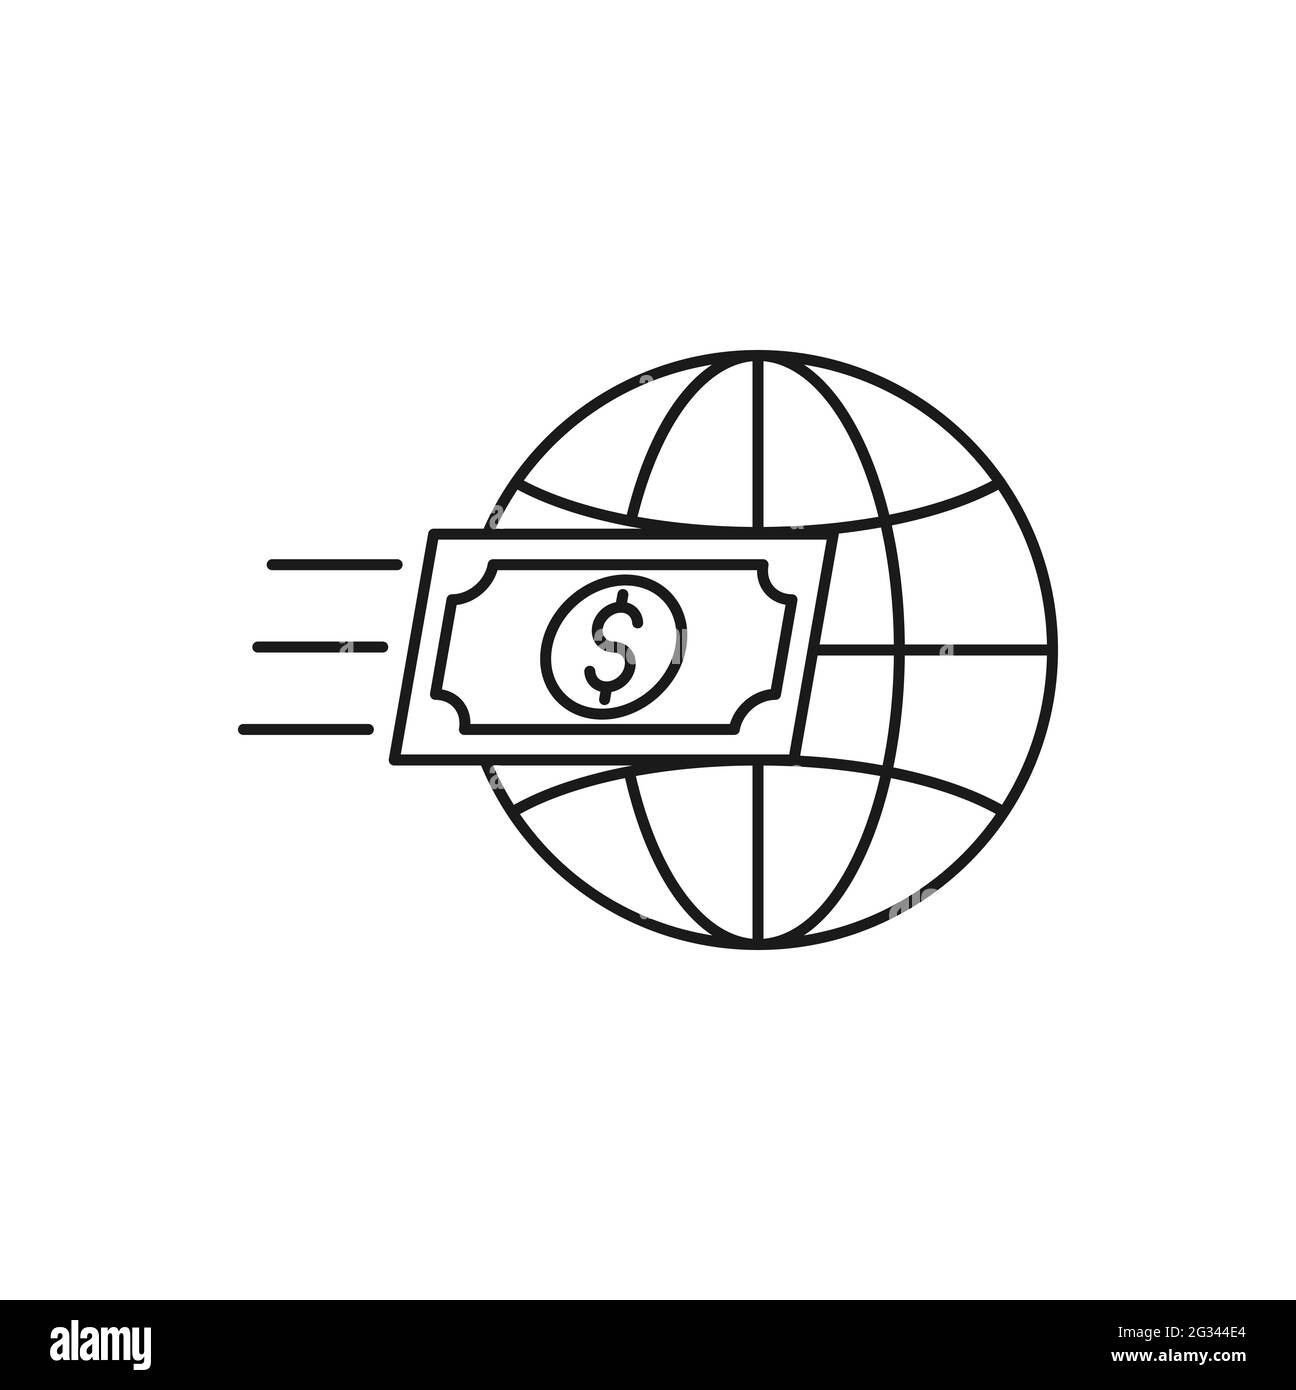 Argent avec Globe Icon Vector Design. Globe with Dollar Money Cash Icon design concept for Banking, Finance, Currency and Trading Investment Business W Illustration de Vecteur